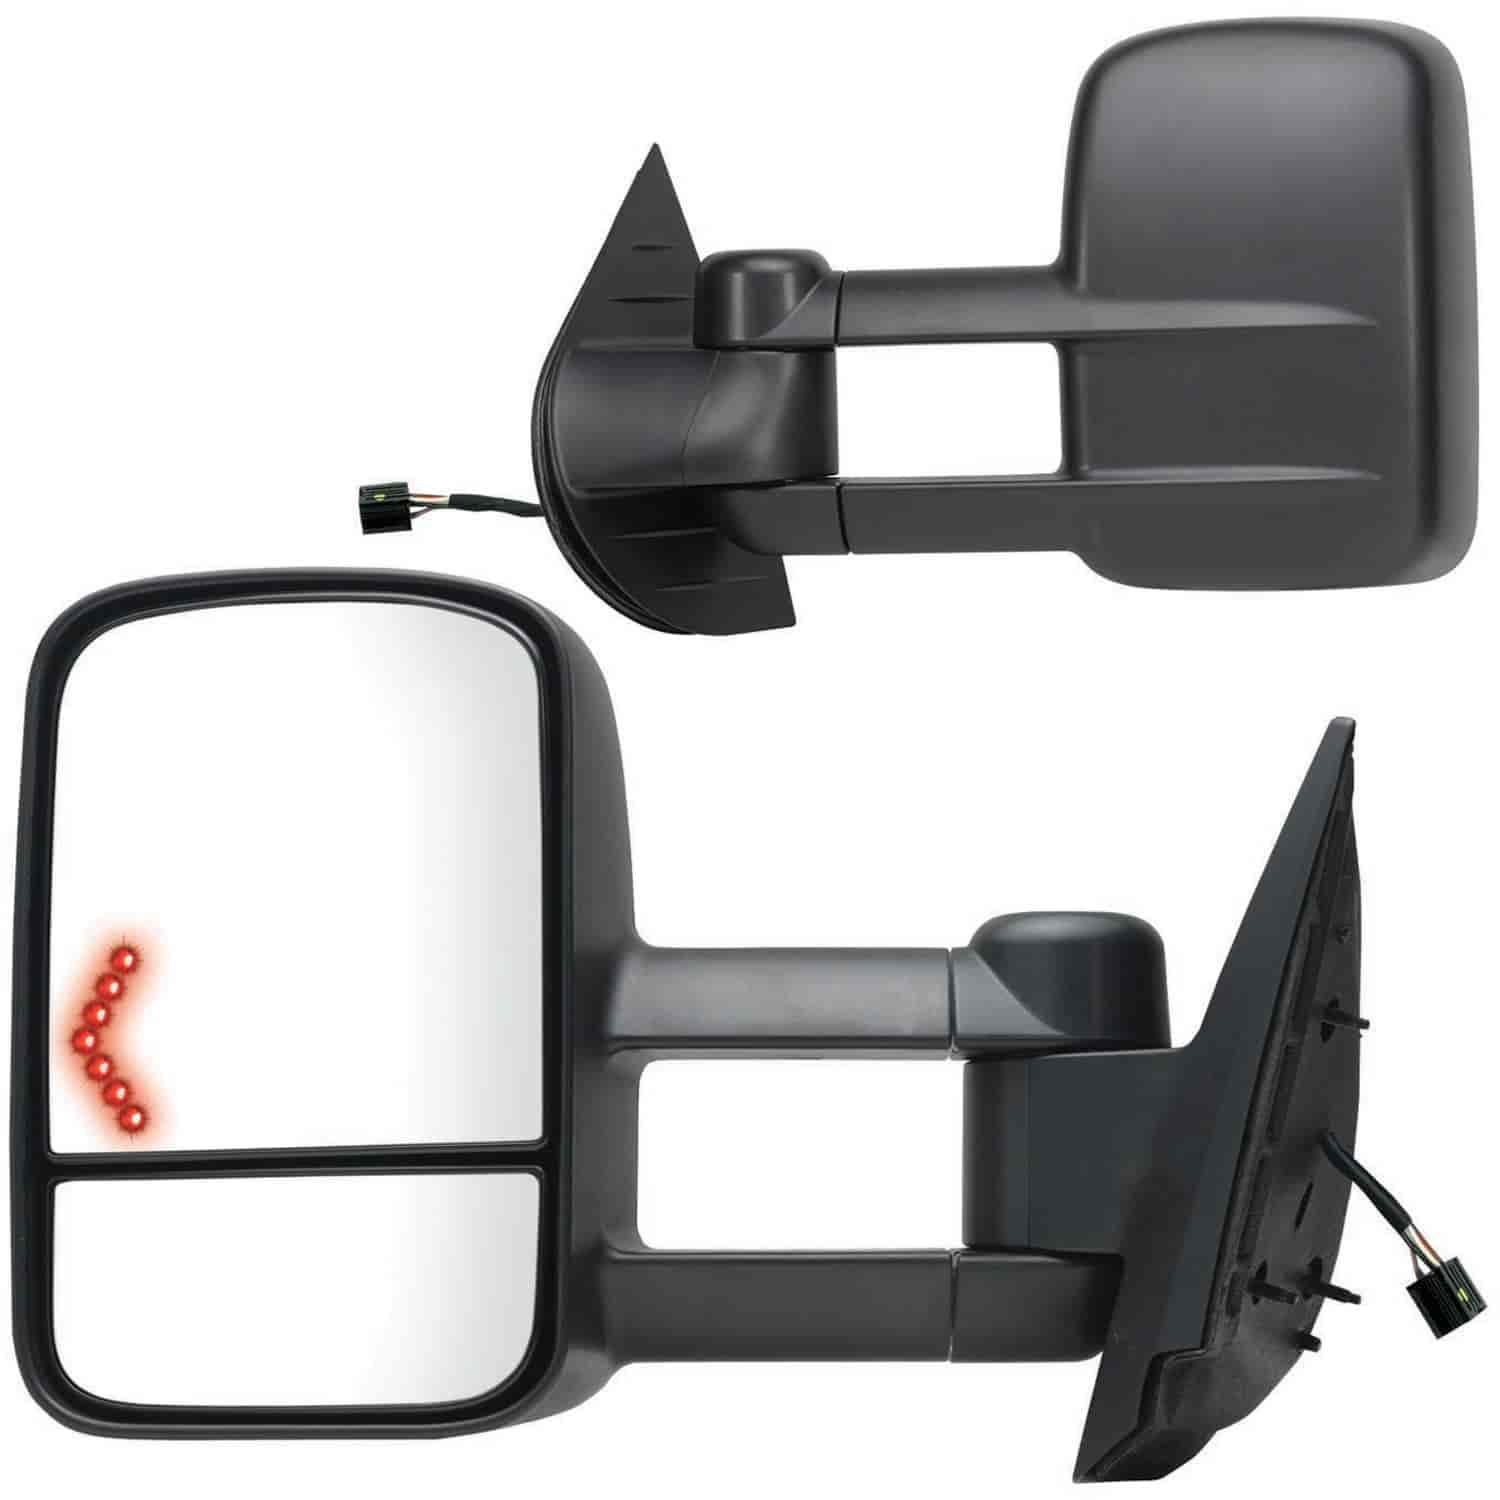 OEM Style Replacement Mirrors Fits 2007 to 2014 Chevy Silverado & GMC Sierra